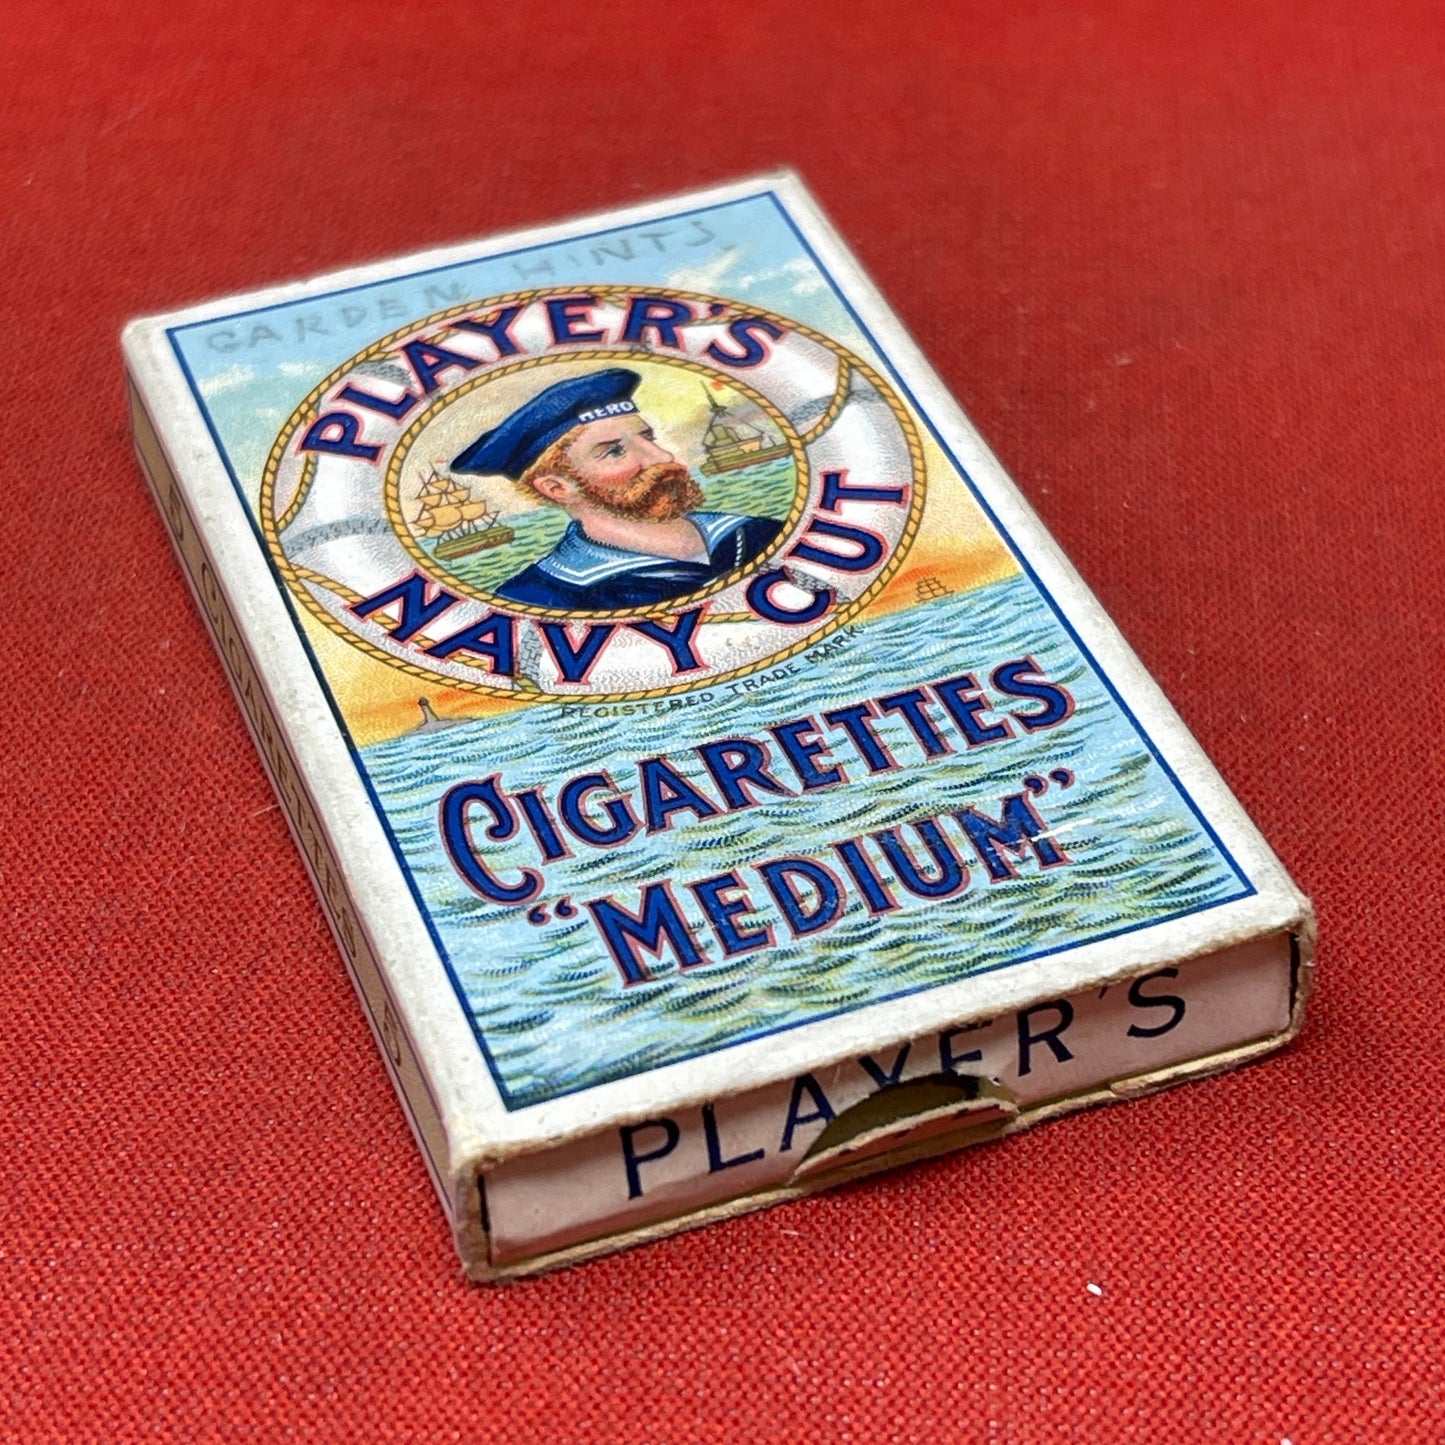 An empty packet for 10 Player's Medium Navy Cut cigarettes. The front has an ocean scene and a sailor framed in a life belt.